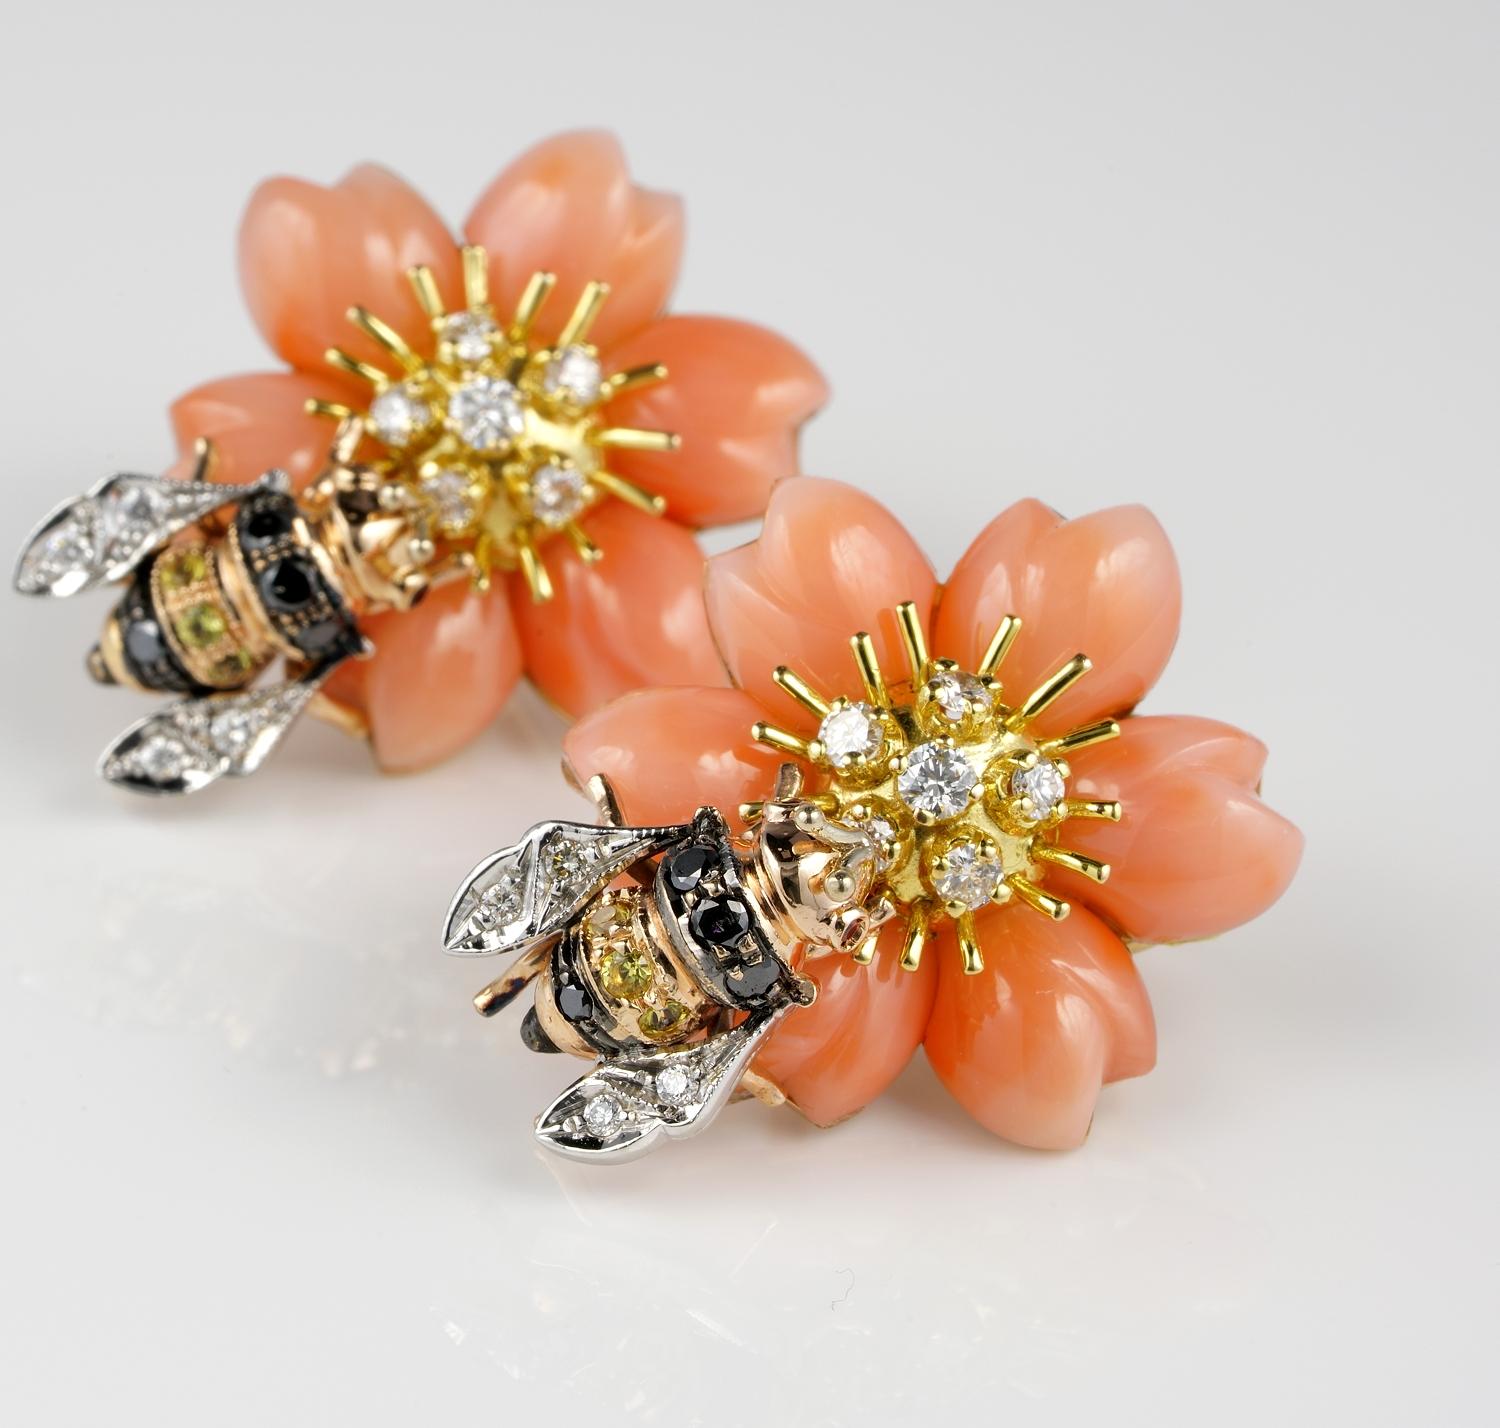 Pink Flowers in the Garden

Delight yourself with these amazing Art Crafted earrings, impressive and so darling, look stunning when worn!
Individually hand crafted by Italian masters of coral jewellery, all solid 14 KT made two tome of gold Rose and